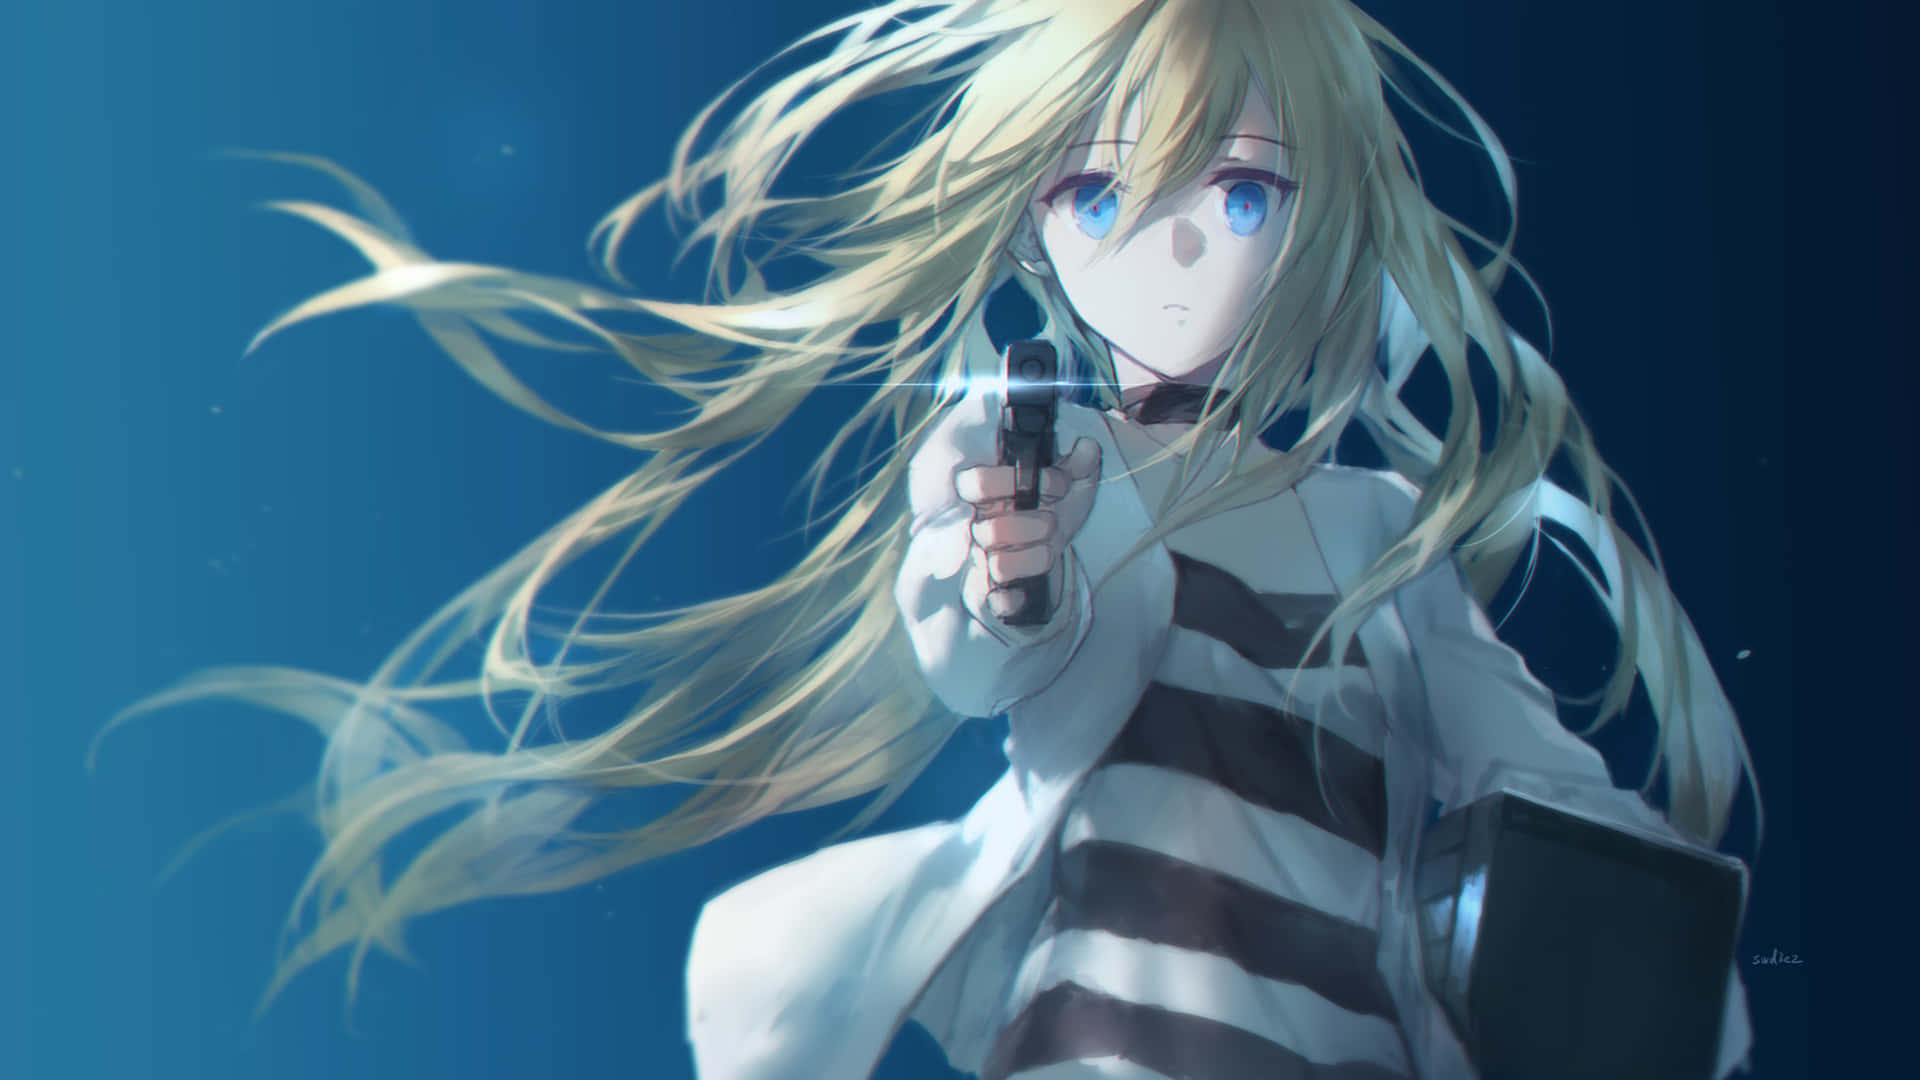 "Join Rachel and Zack on a captivating journey through darkness in Angels of Death"